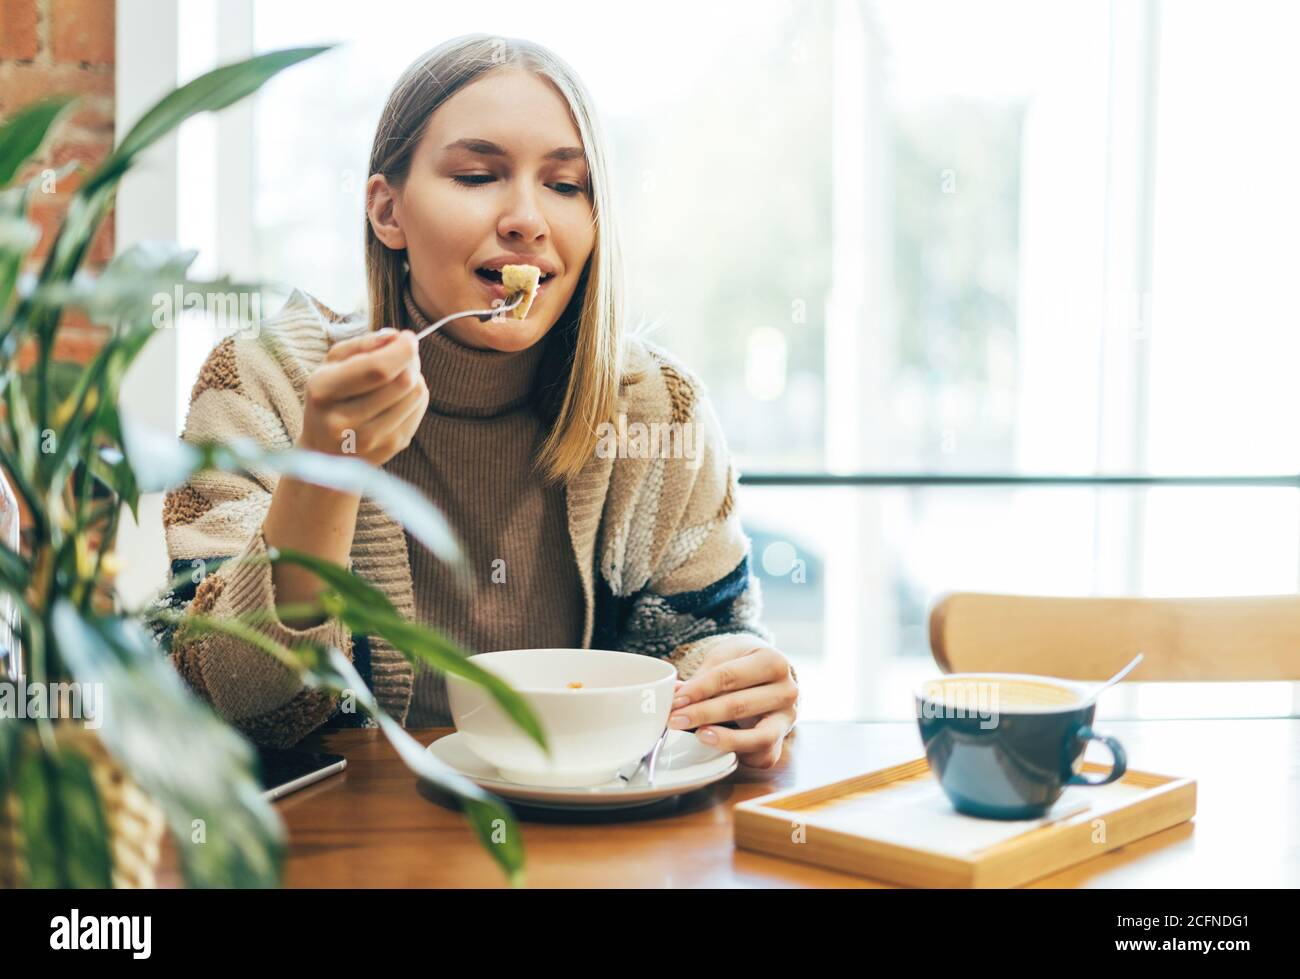 Young smiling blonde woman in casual clothing having lunch at the cafe Stock Photo